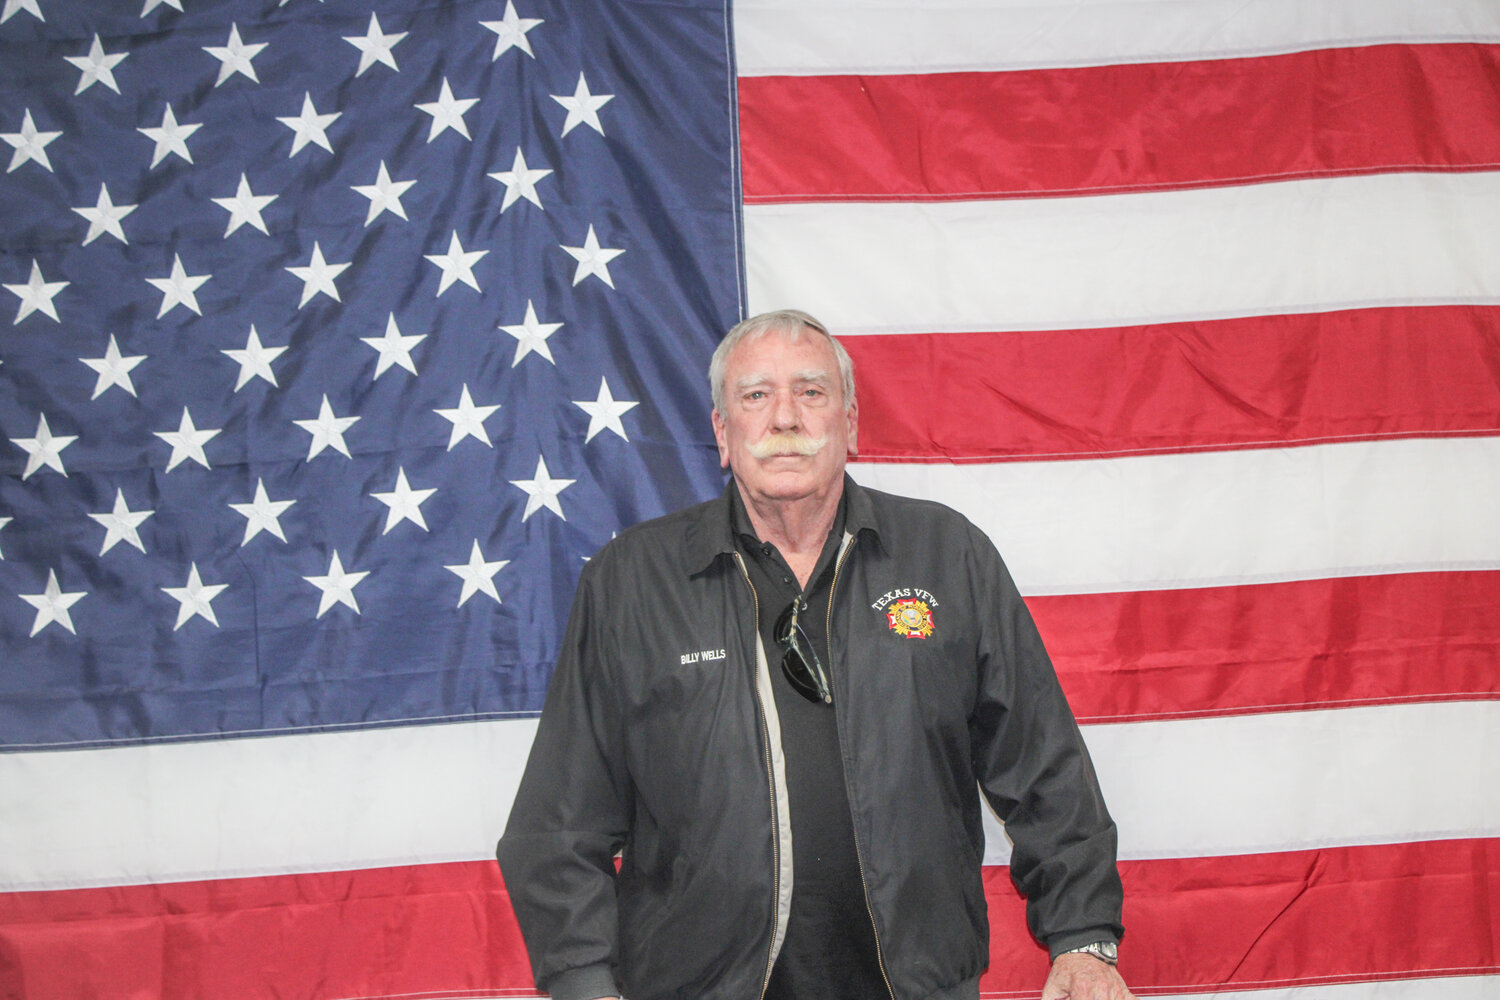 Granbury resident Billy F. Wells is an Army veteran, who served in three Vietnam tours from 1969 until 1972.